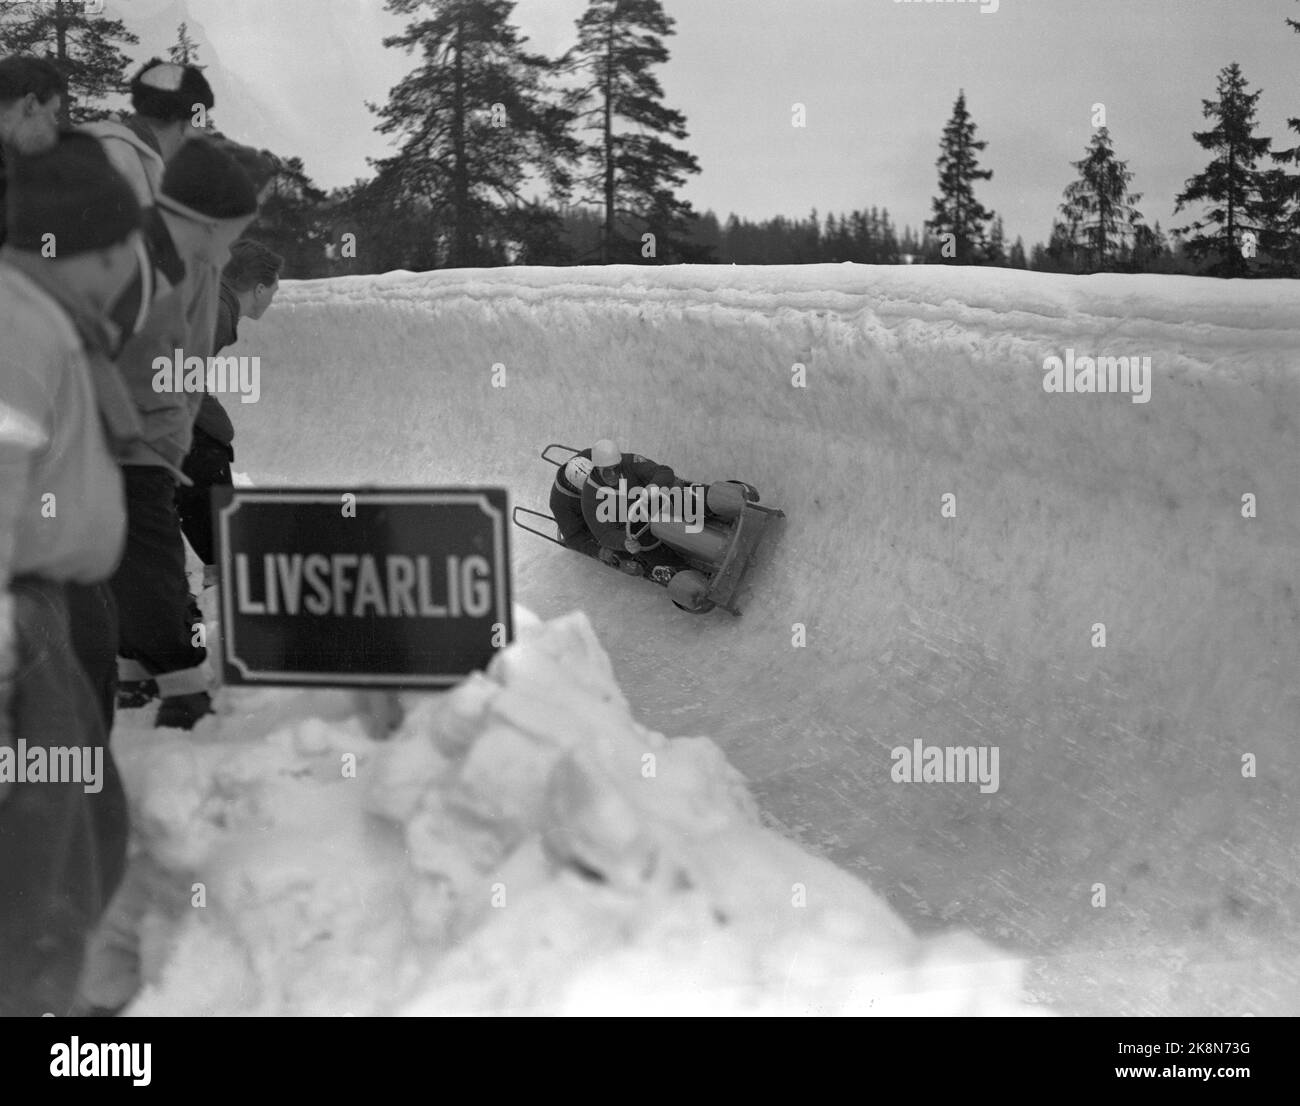 Oslo, Frognerseteren January 1951. The Bobsleigh course, which will be built for the Olympic Winter Games next winter, is ready for test driving. Here one of the bobs in action under the test race. The warning sign in the foreground has the text 'deadly'. Photo: Skotaam and Kjus / Current / NTB Stock Photo